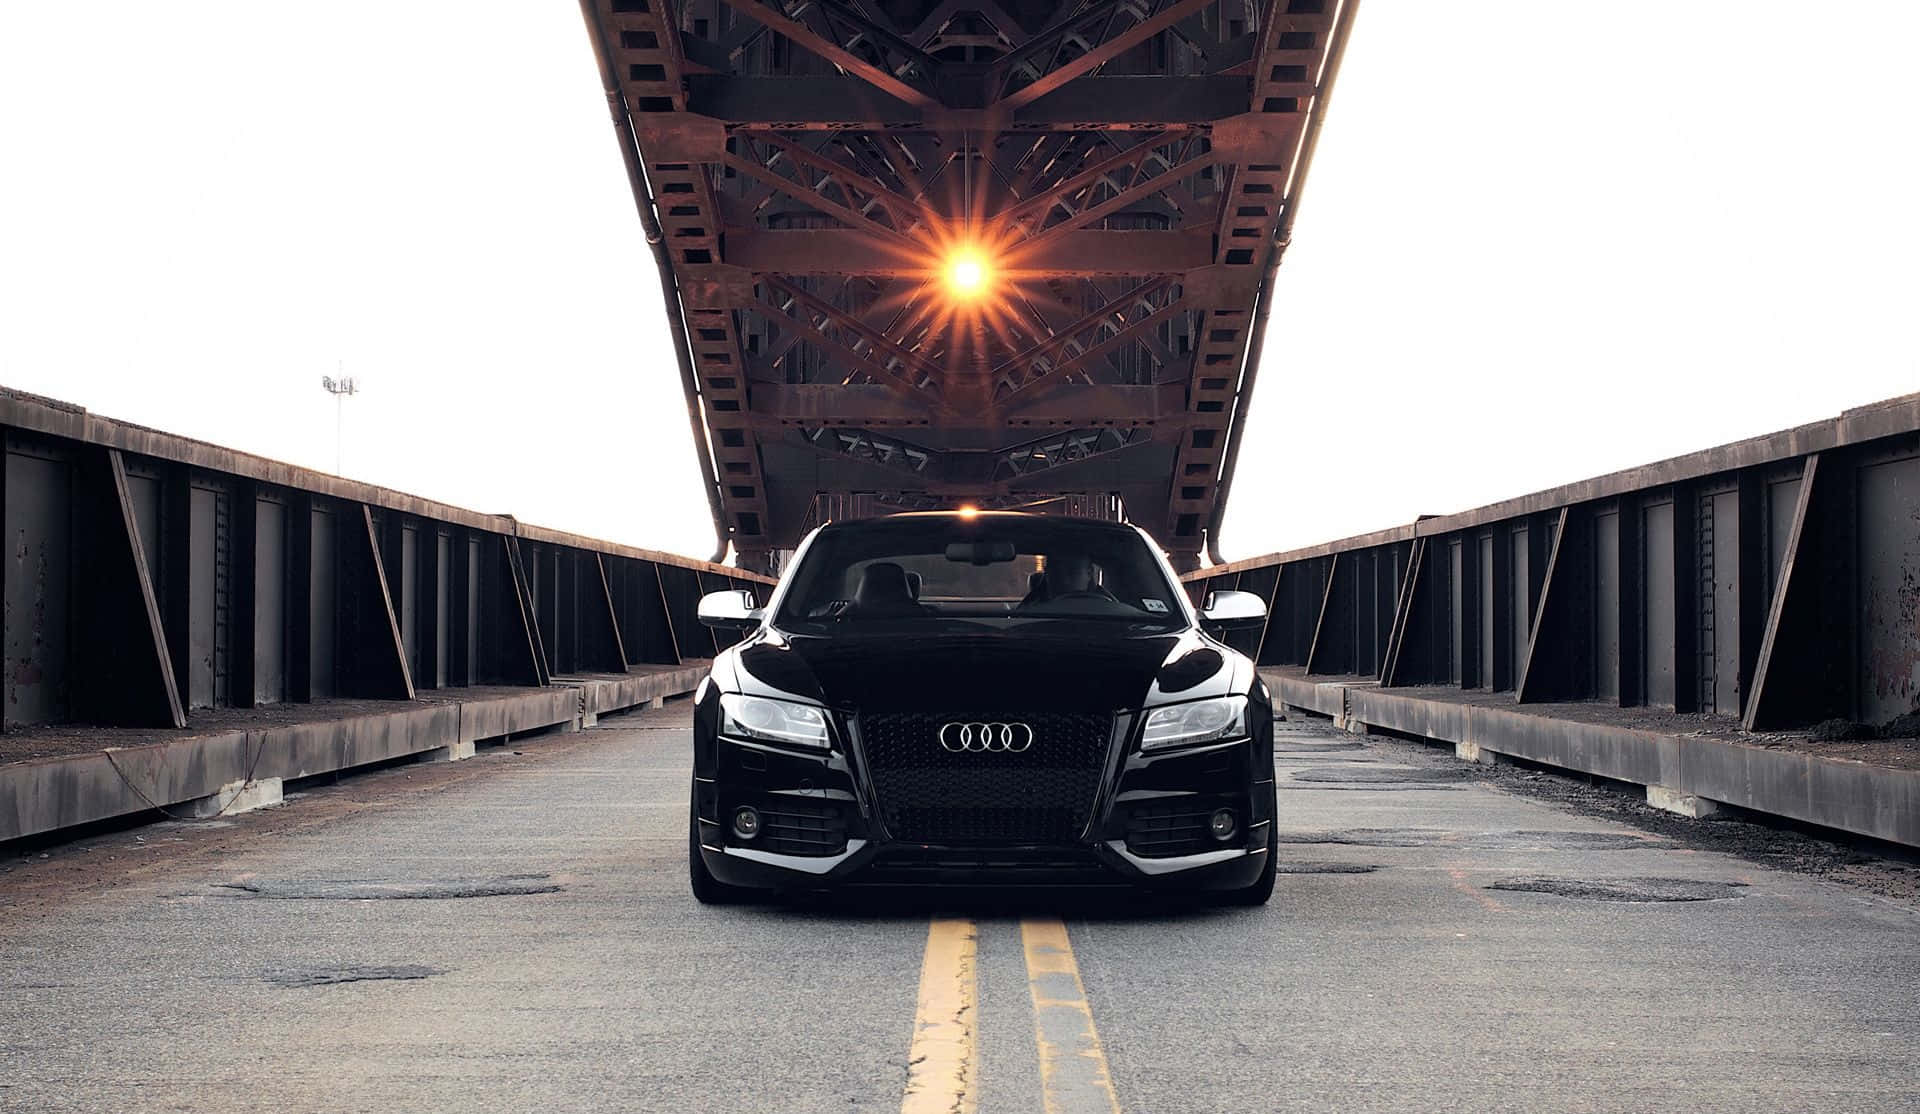 Eye-catching Audi S5 in Action Wallpaper